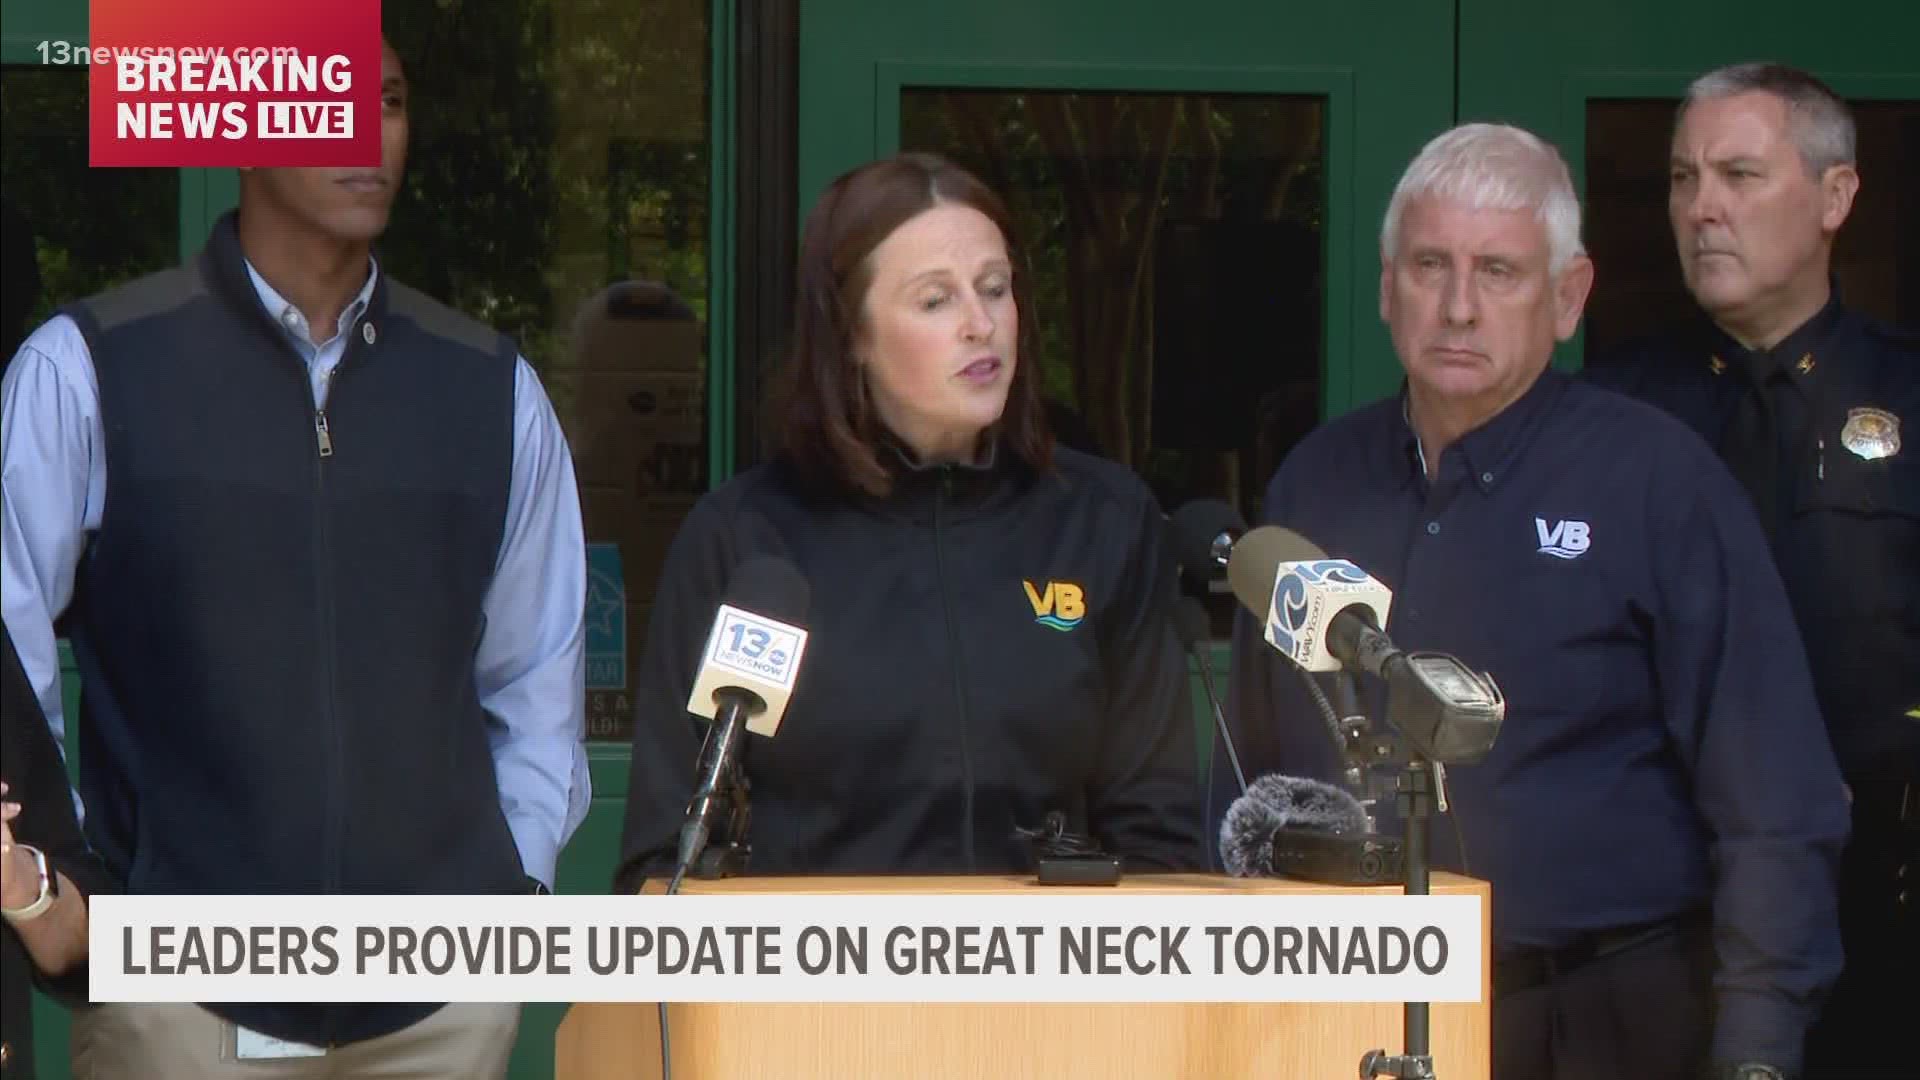 Mayor Bobby Dyer and other city leaders are holding a press conference about last night's tornado in the Great Neck area, and the recovery efforts.